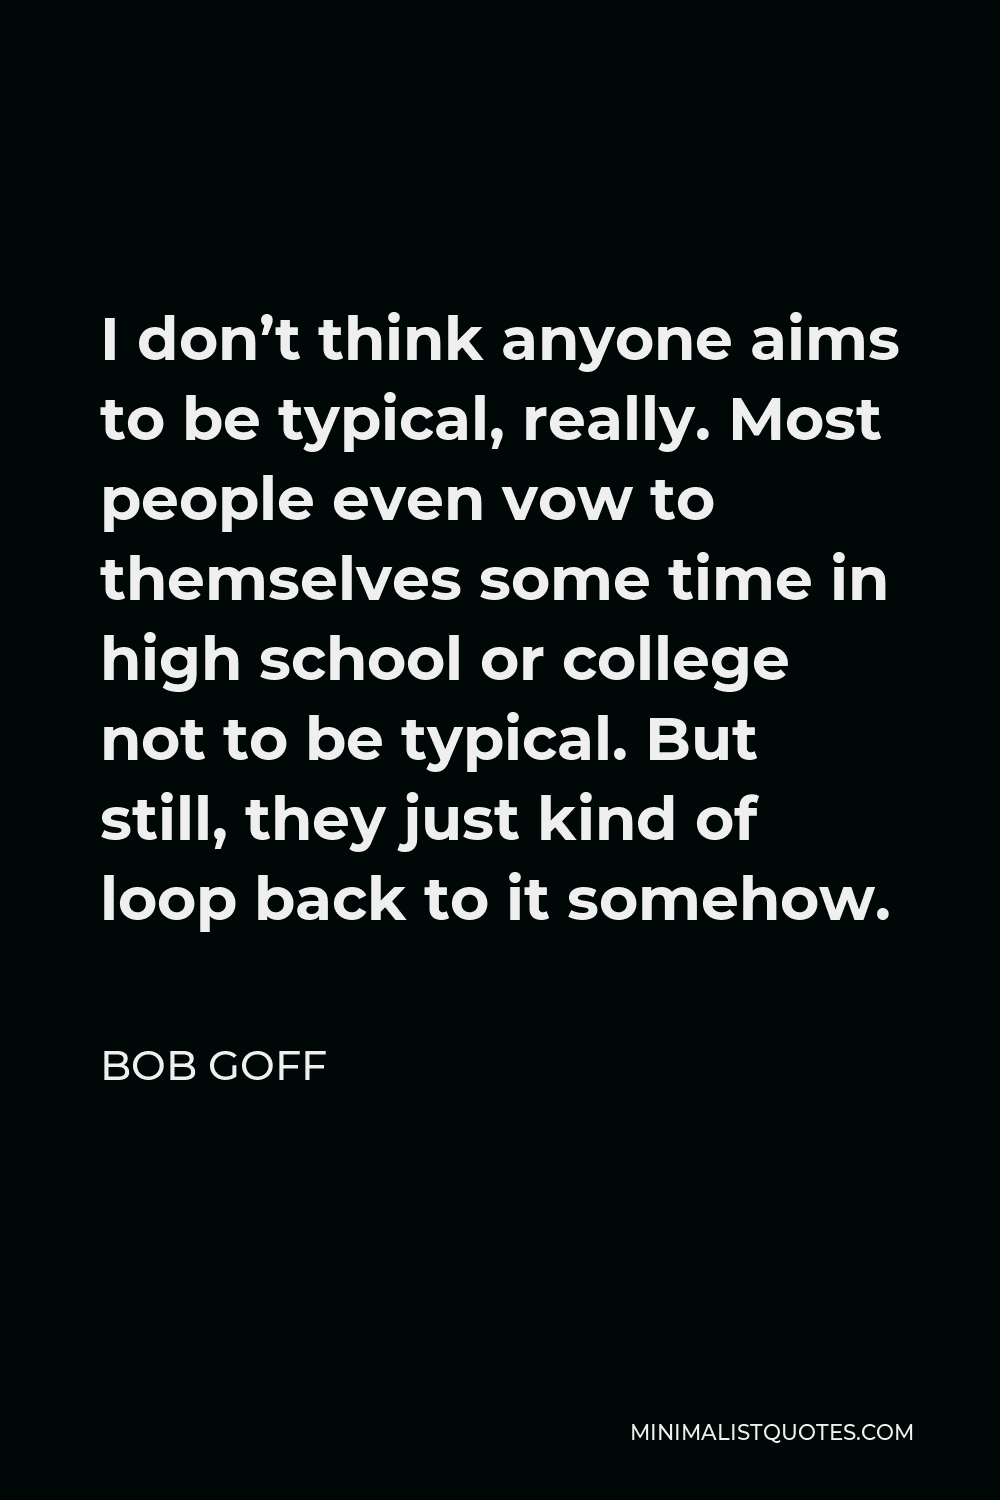 Bob Goff Quote - I don’t think anyone aims to be typical, really. Most people even vow to themselves some time in high school or college not to be typical. But still, they just kind of loop back to it somehow.